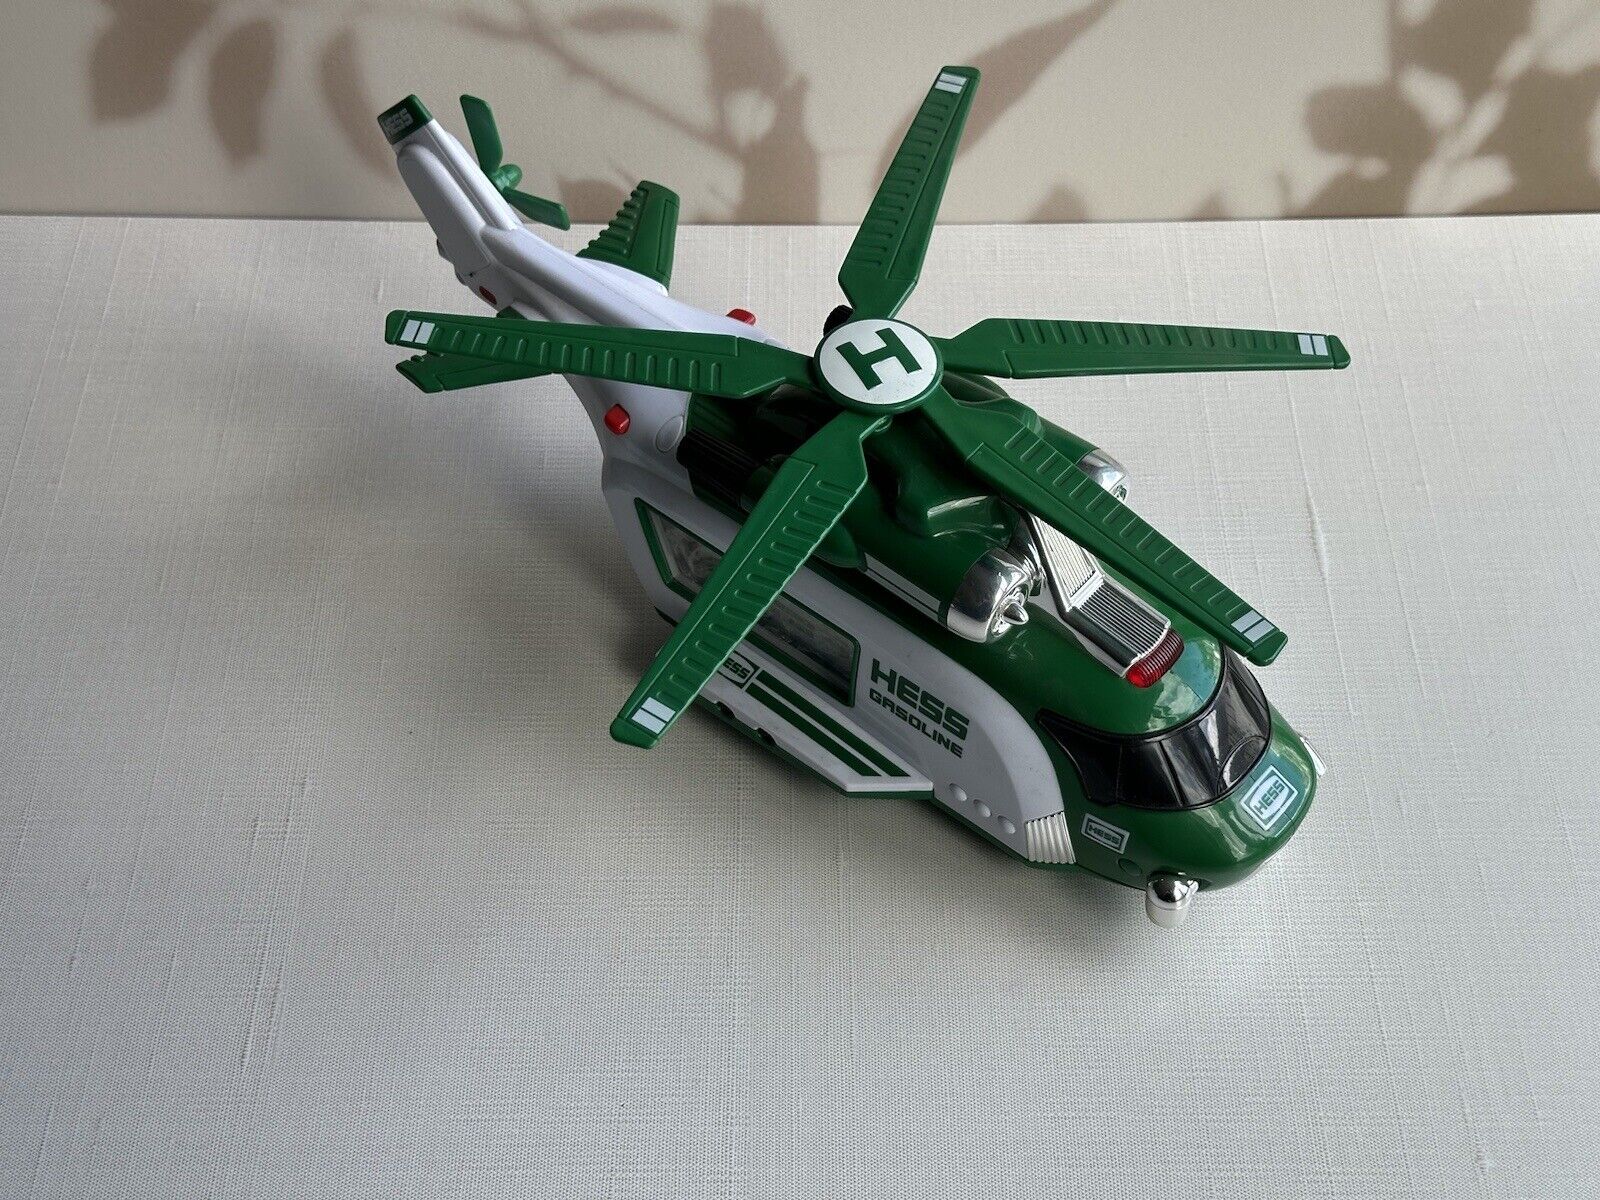 HESS Helicopter And Car Set 2012 Vintage Toy